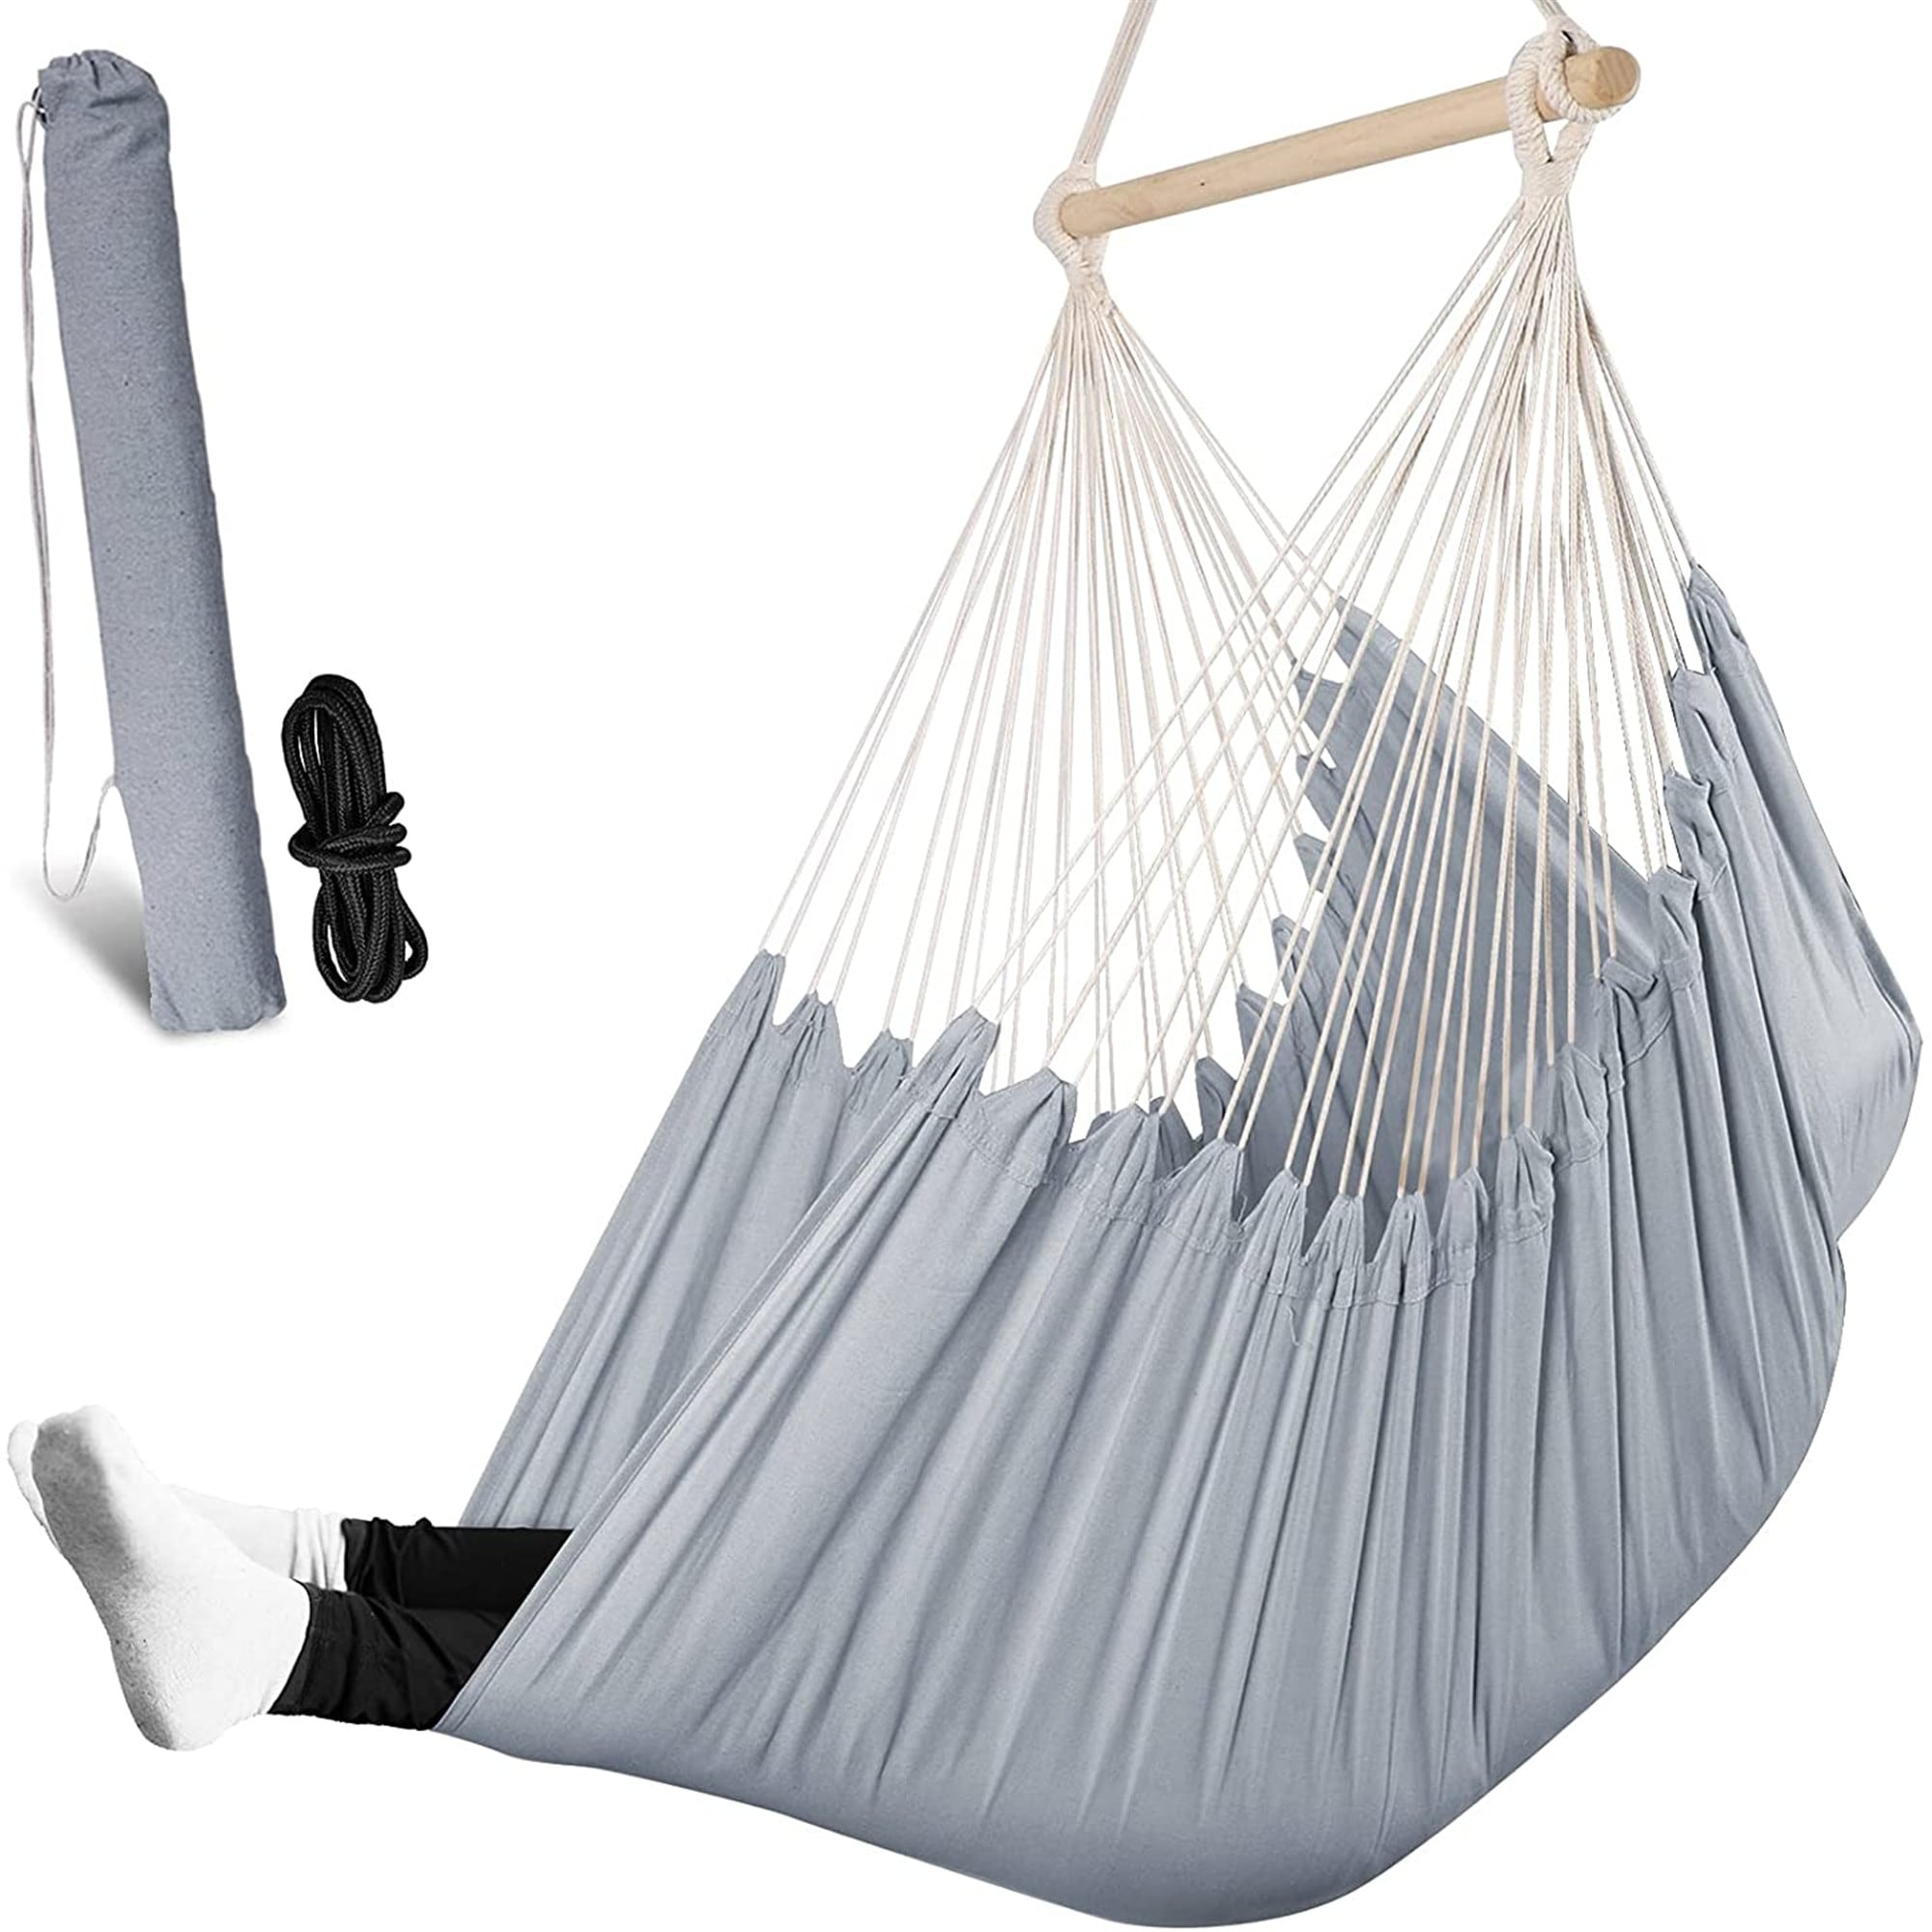 LA SIESTA Hammock Chair Swing XL Relax Hanging Seat Max 330 lbs Extra Large Hanging Chair Patio Lawn Chair Cotton Weave